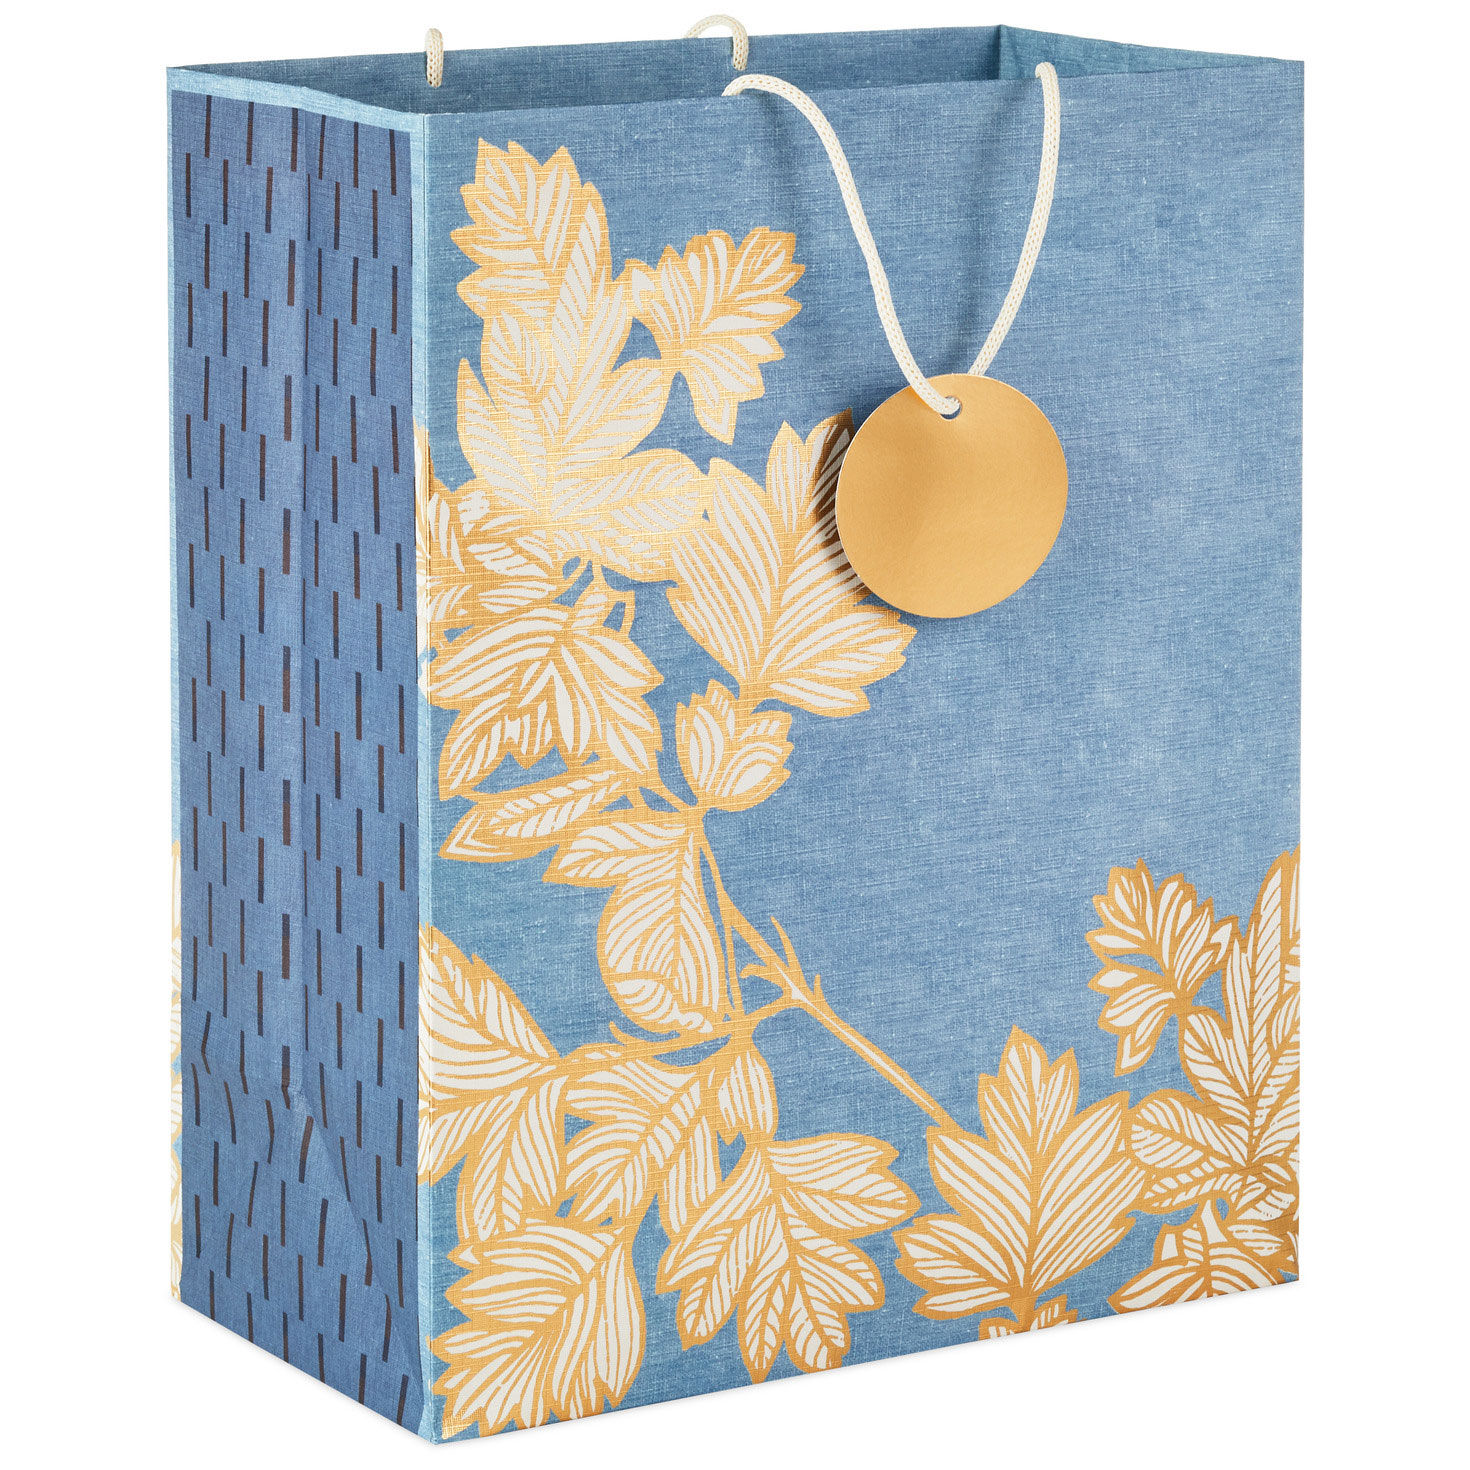 Hallmark 13 Large Graduation Gift Bag with Tissue Paper (Gold and